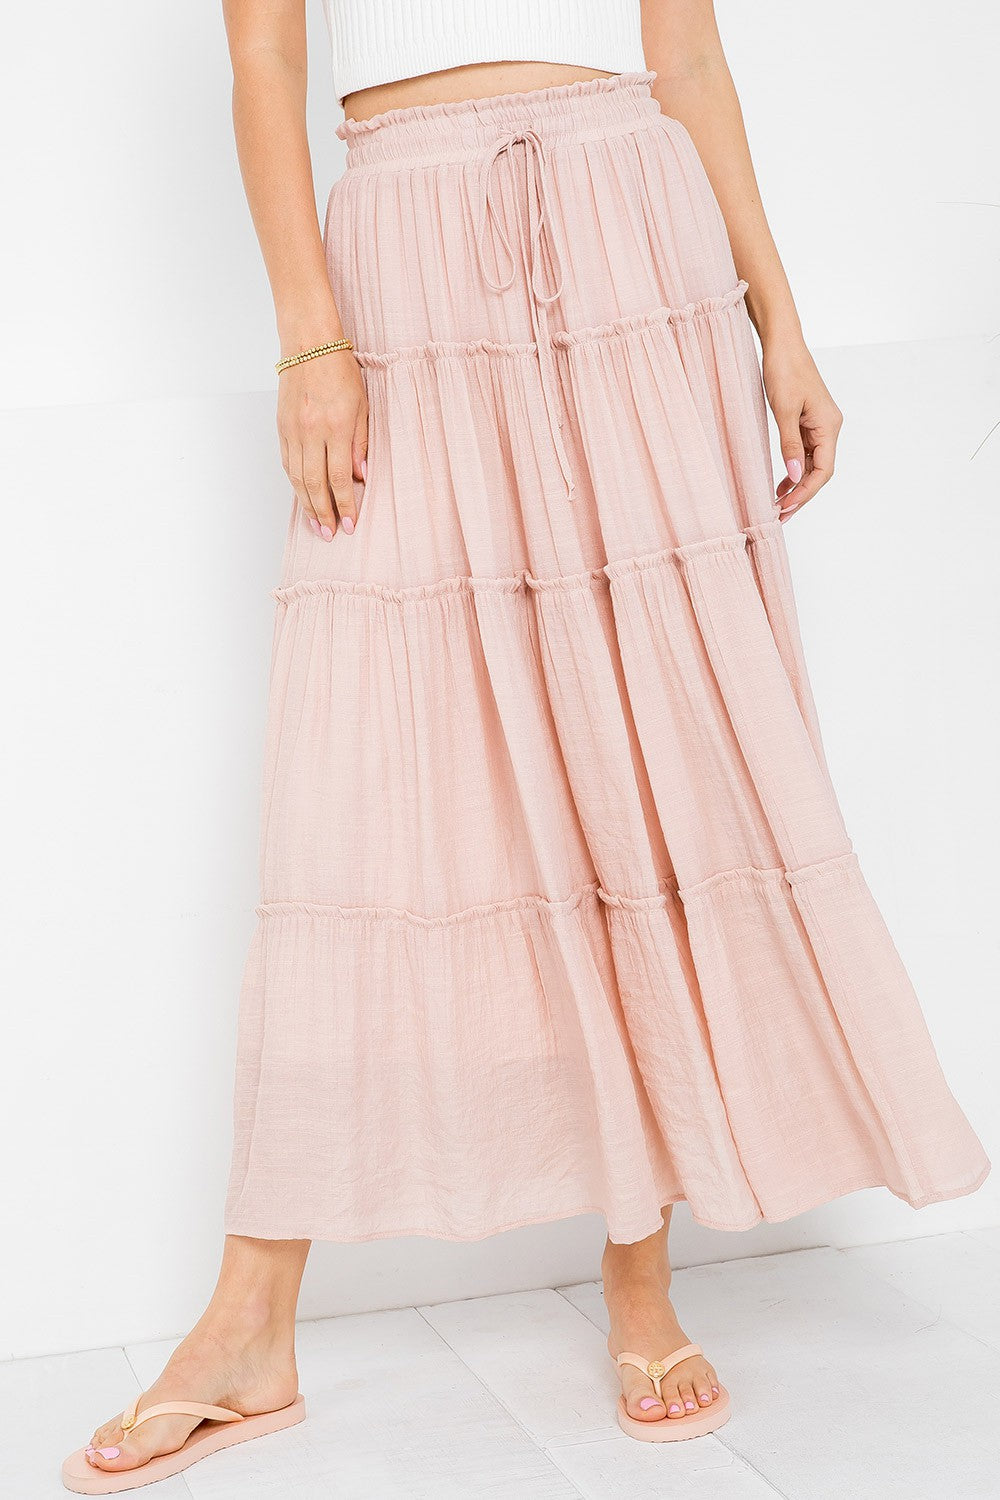 TIERED DRAWSTRING MAXI SKIRT in NUDE BLUSH